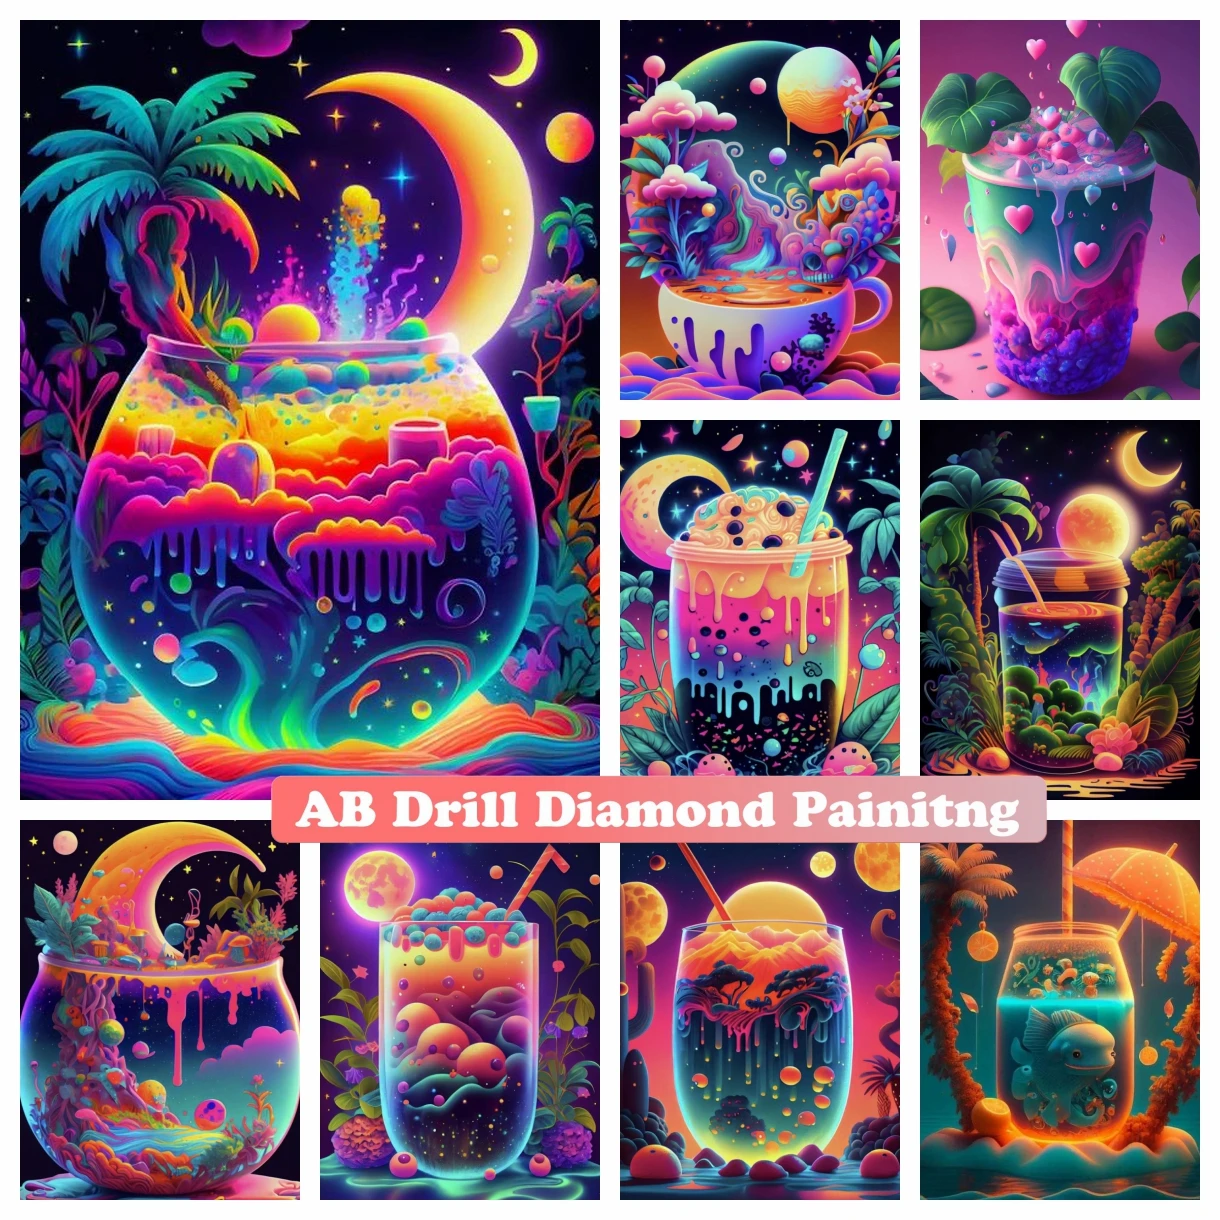 

A Cup Of Psychedelic Dreams 5D AB Drill Diamond Painting Neon Drink Art Mosaic Cross Stitch Home Decor Gifts NEW Arrivals